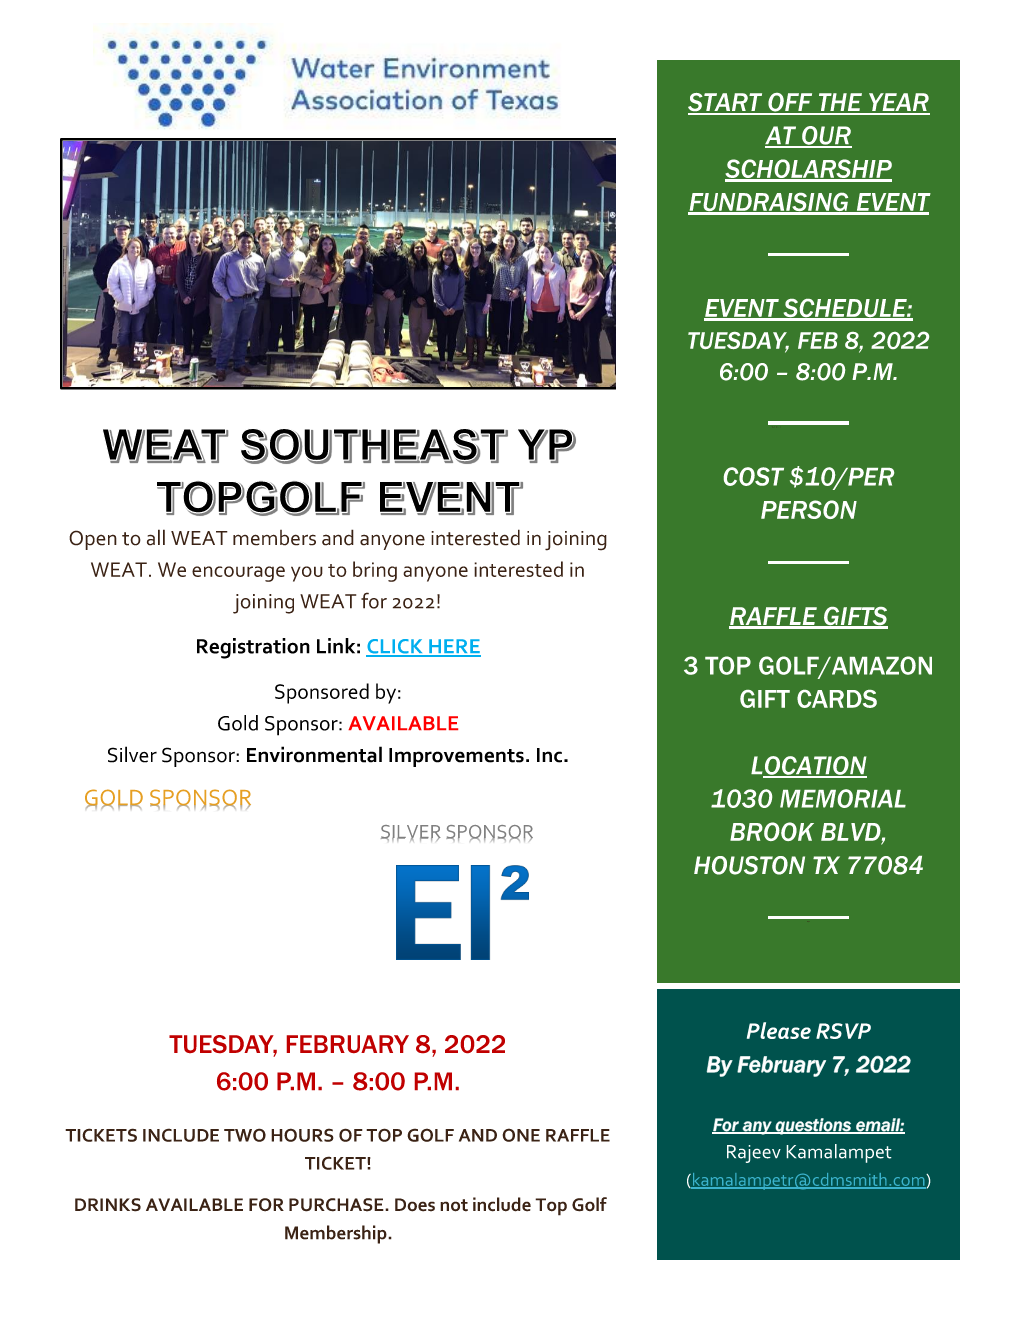 WEAT Southeast YP Topgolf Event 2022